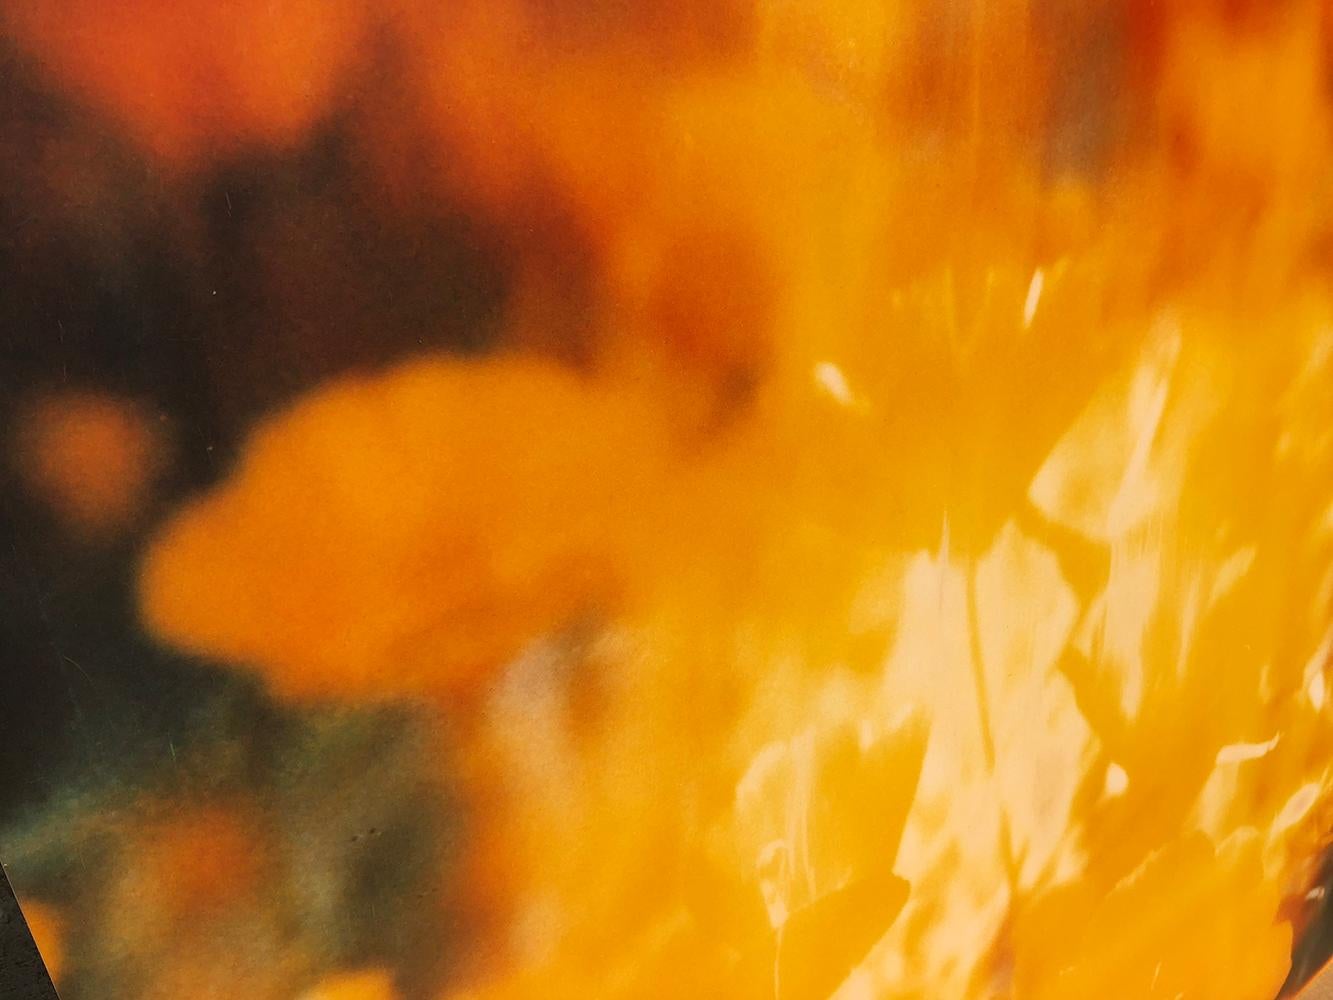 Yellow Flower (The Last Picture Show) - 2005

128x125cm, 
Edition 4 of 5, 
analog C-Print, hand-printed by the artist on Fuji Crystal Archive Paper, based on a Polaroid. 
mounted on Aluminum with matte UV-Protection.  
Signed on back with